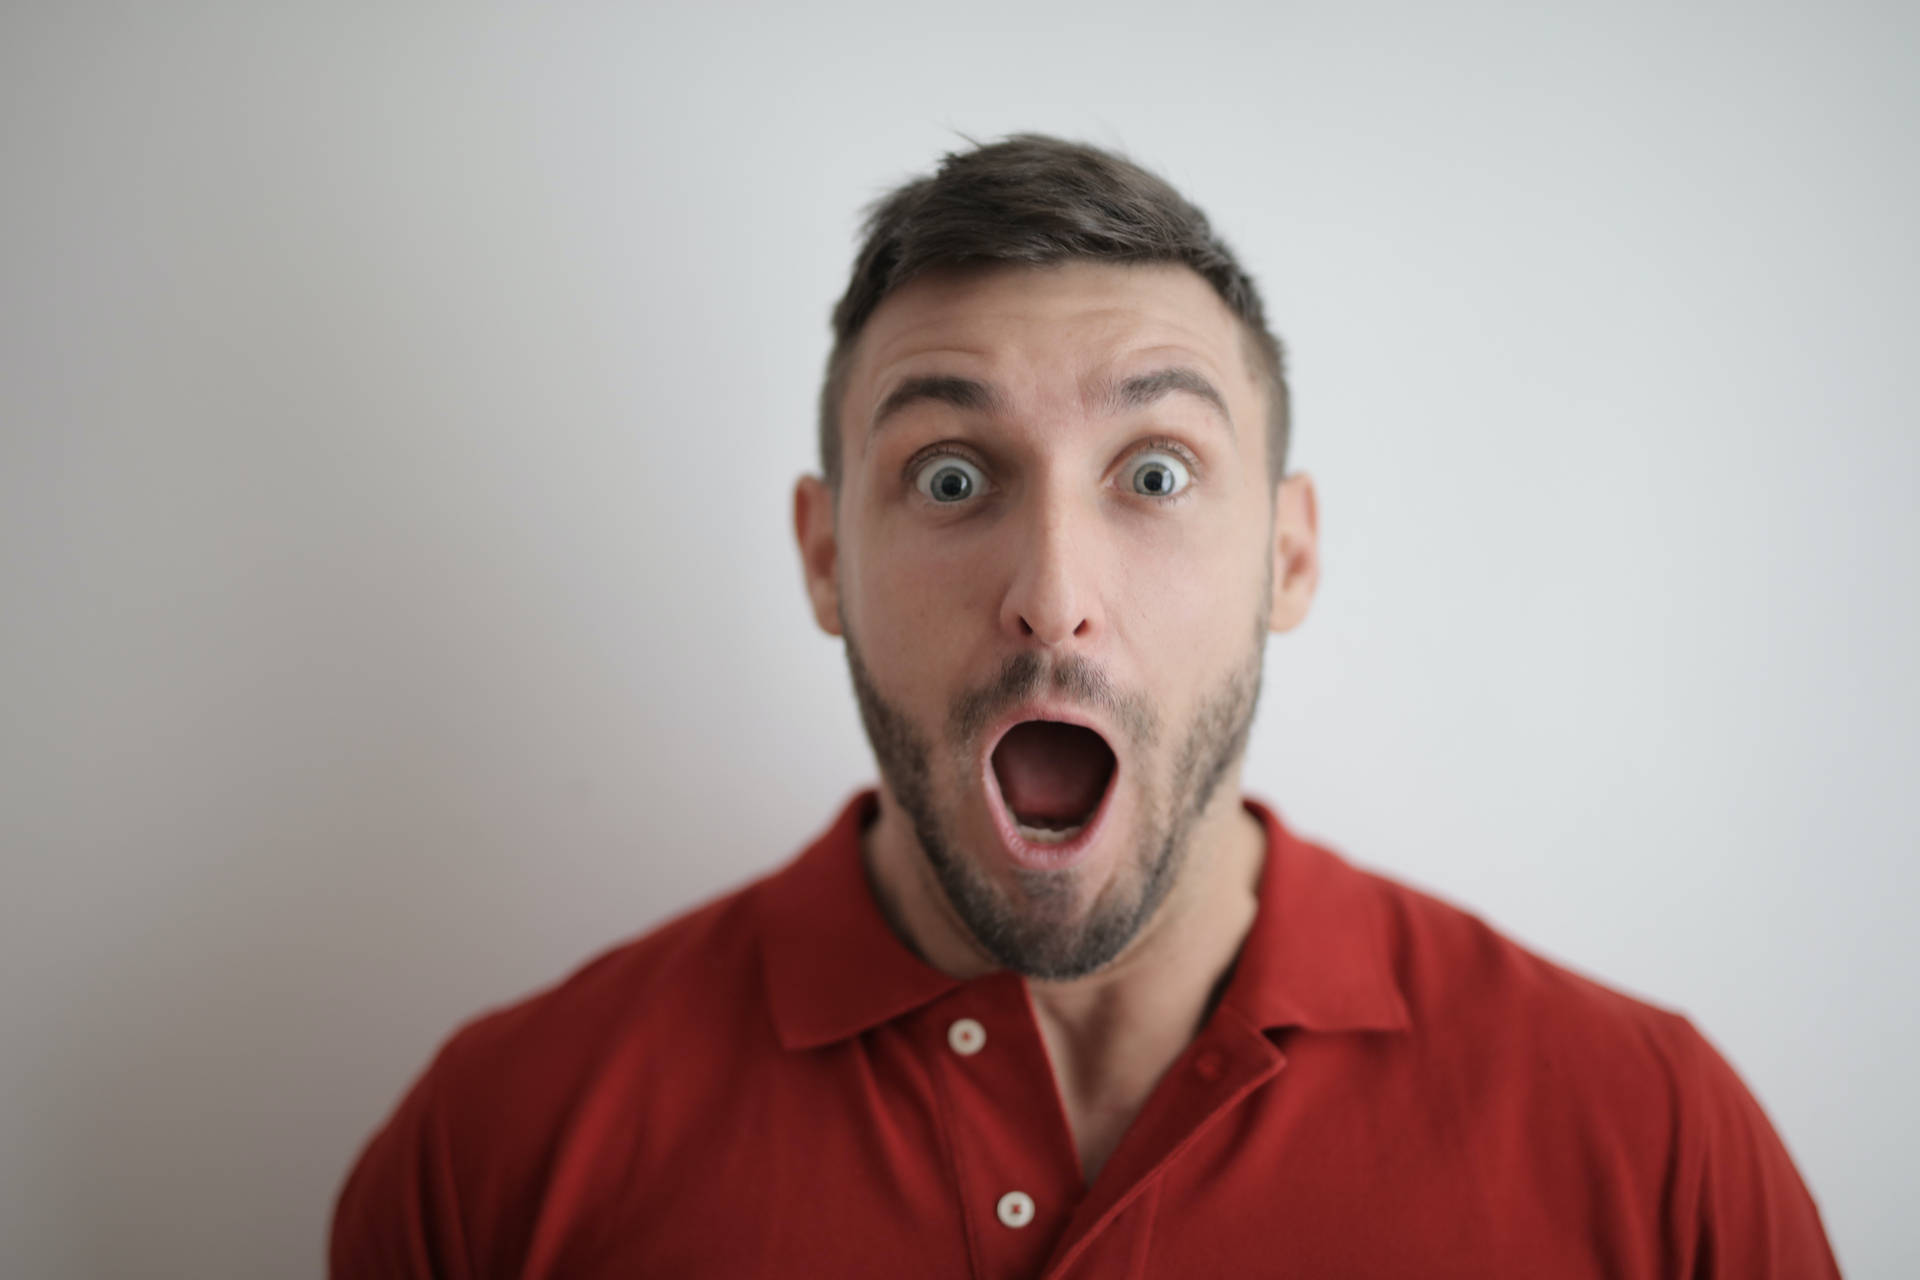 Headshot Of A Man With Shocked Face Wallpaper